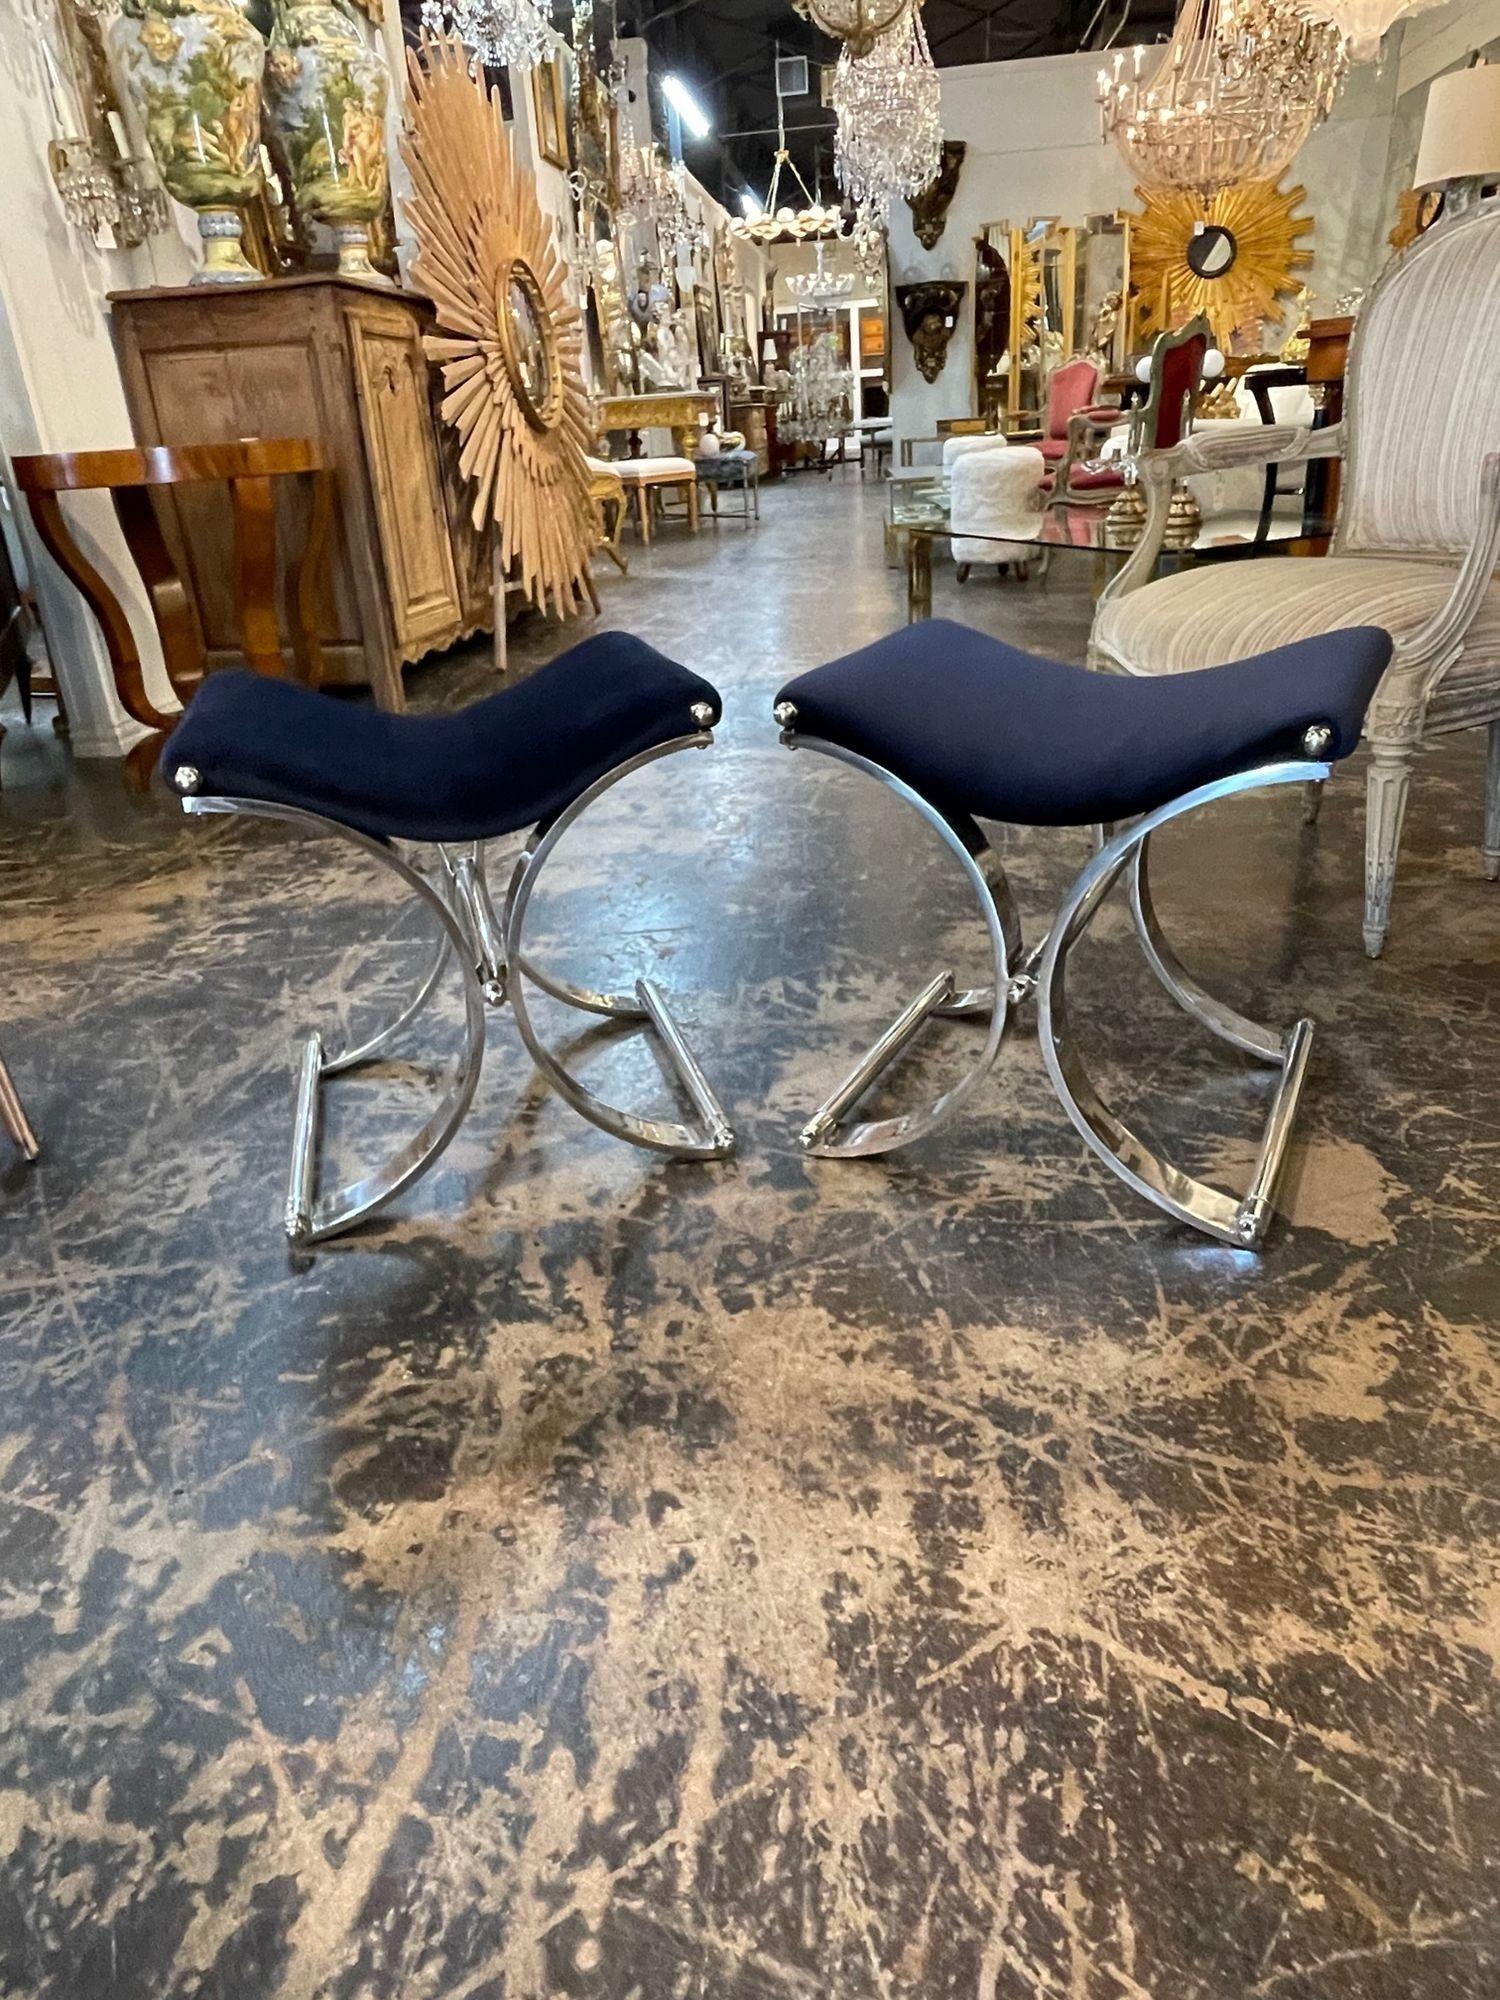 Very fine vintage Italian Mid-Century Modern Italian heavy chrome plated and velvet benches. These benches are upholstered in beautiful blue velvet fabric. Exceptional quality and great for a modern look!